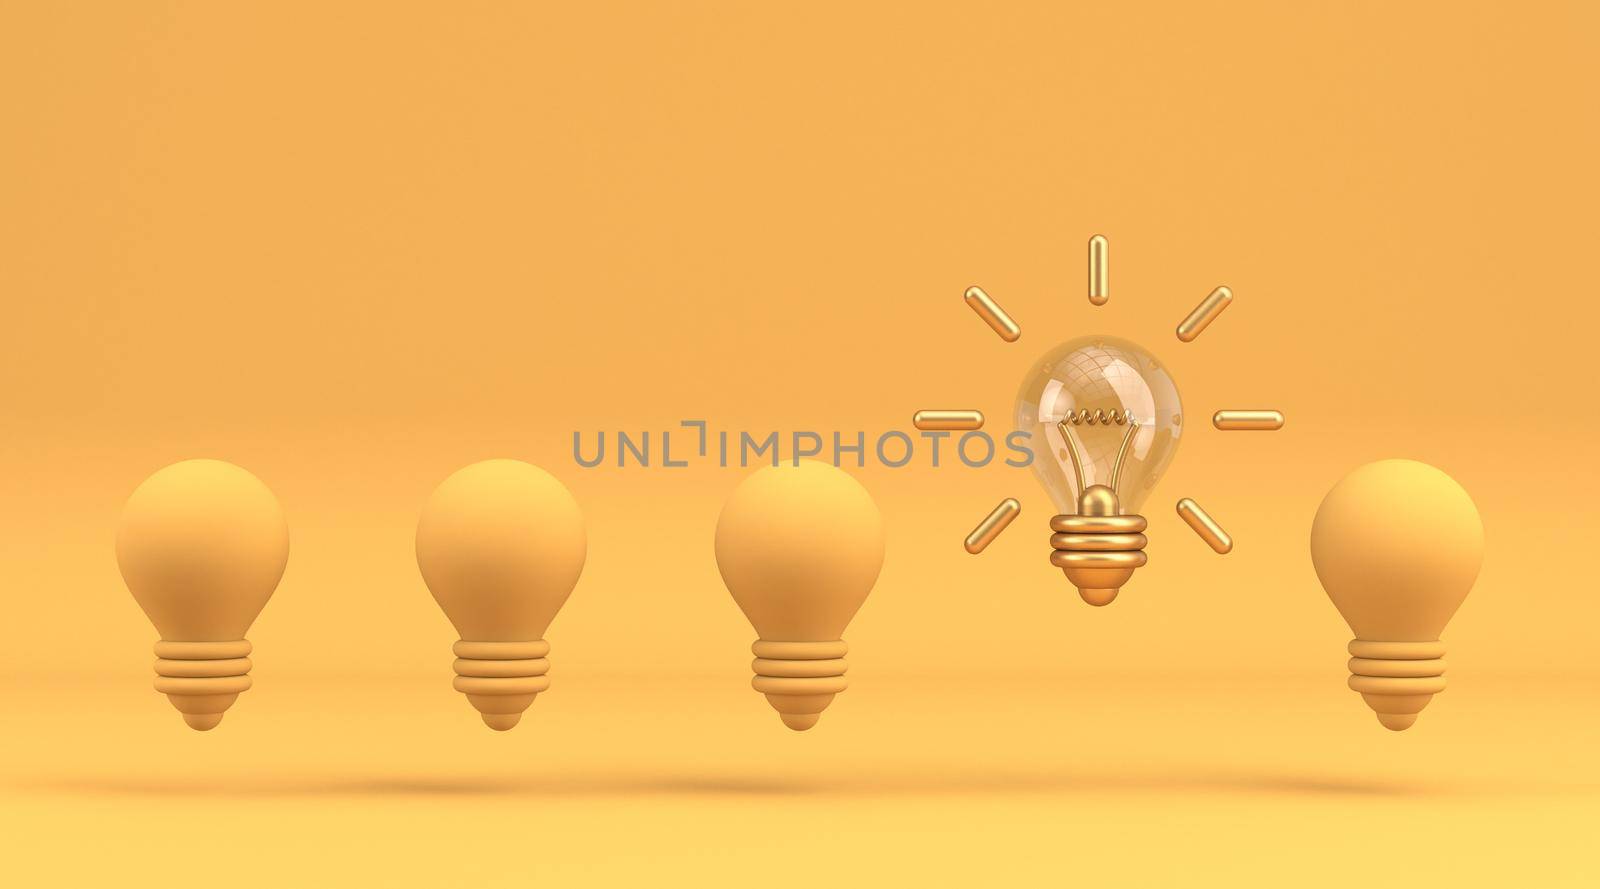 Five yellow light bulb and one lighting 3D rendering illustration isolated on yellow background